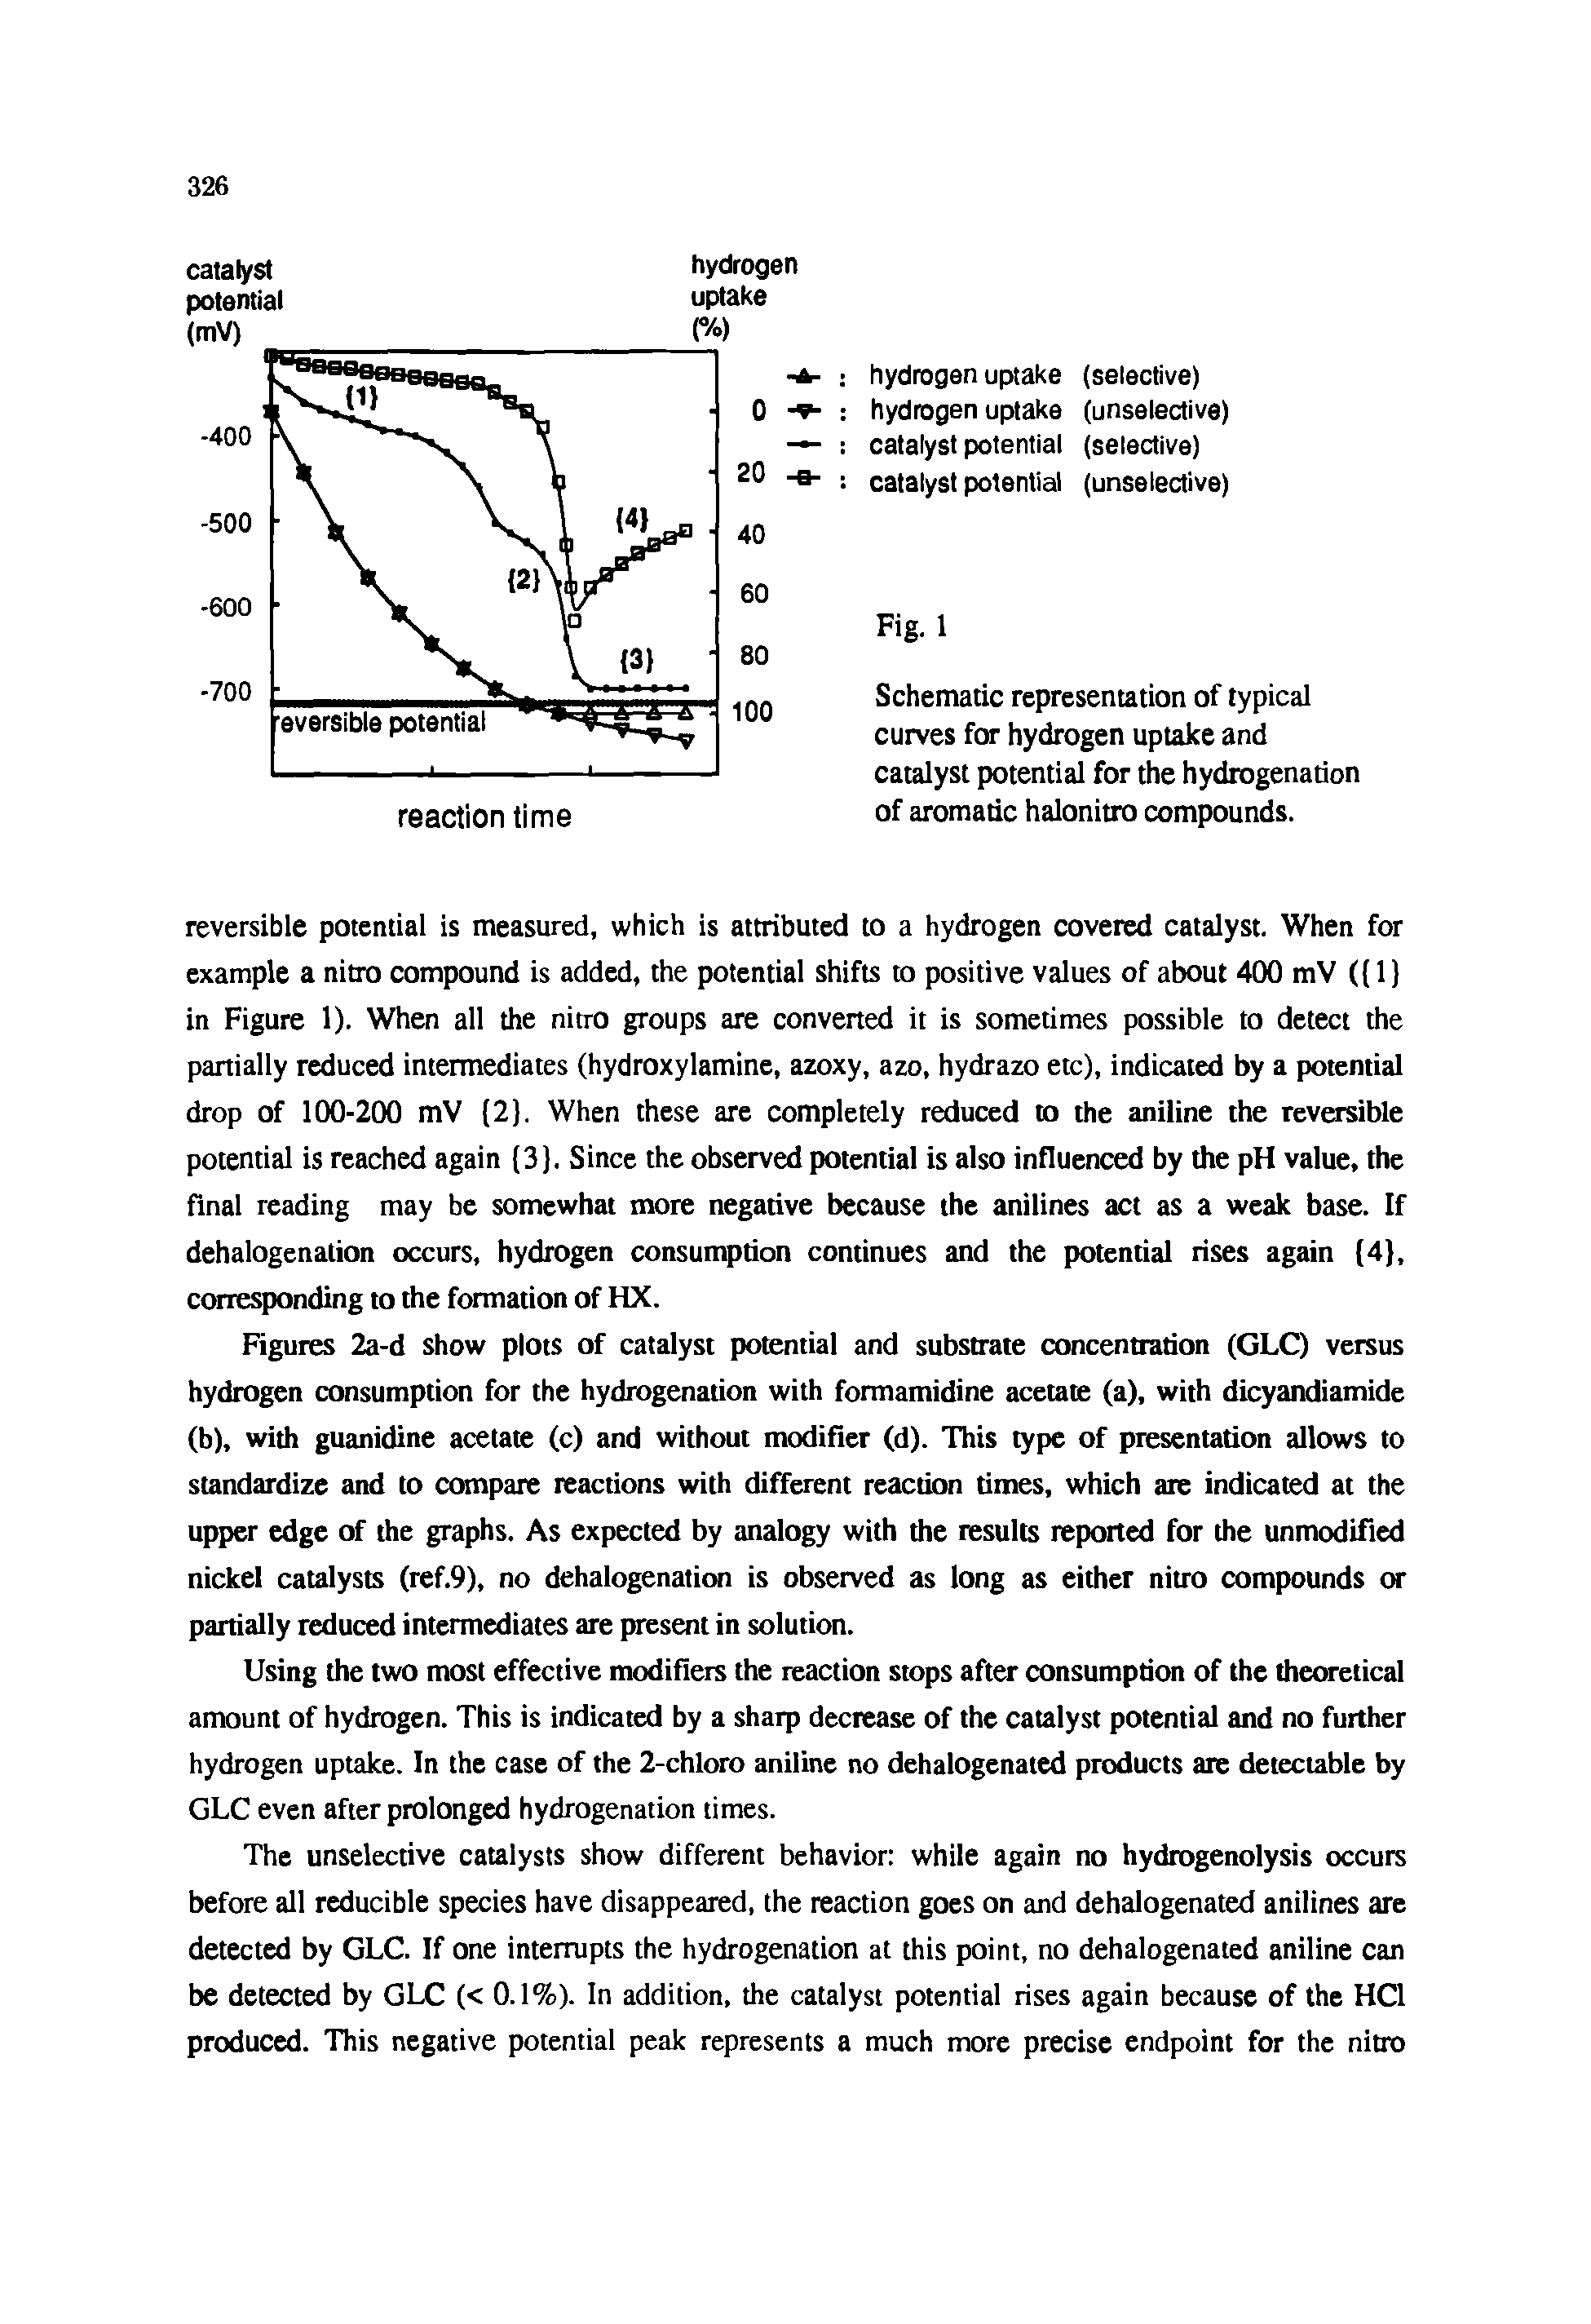 Figures 2a-d show plots of catalyst potential and substrate concentration (GLC) versus hydrogen consumption for the hydrogenation with formamidine acetate (a), with dicyandiamide (b), with guanidine acetate (c) and without modifier (d). This type of presentation allows to standardize and to compare reactions with different reaction times, which are indicated at the upper edge of the graphs. As expected by analogy with the results reported for the unmodified nickel catalysts (ref.9), no dehalogenation is observed as long as either nitro compounds or partially reduced intermediates are present in solution.